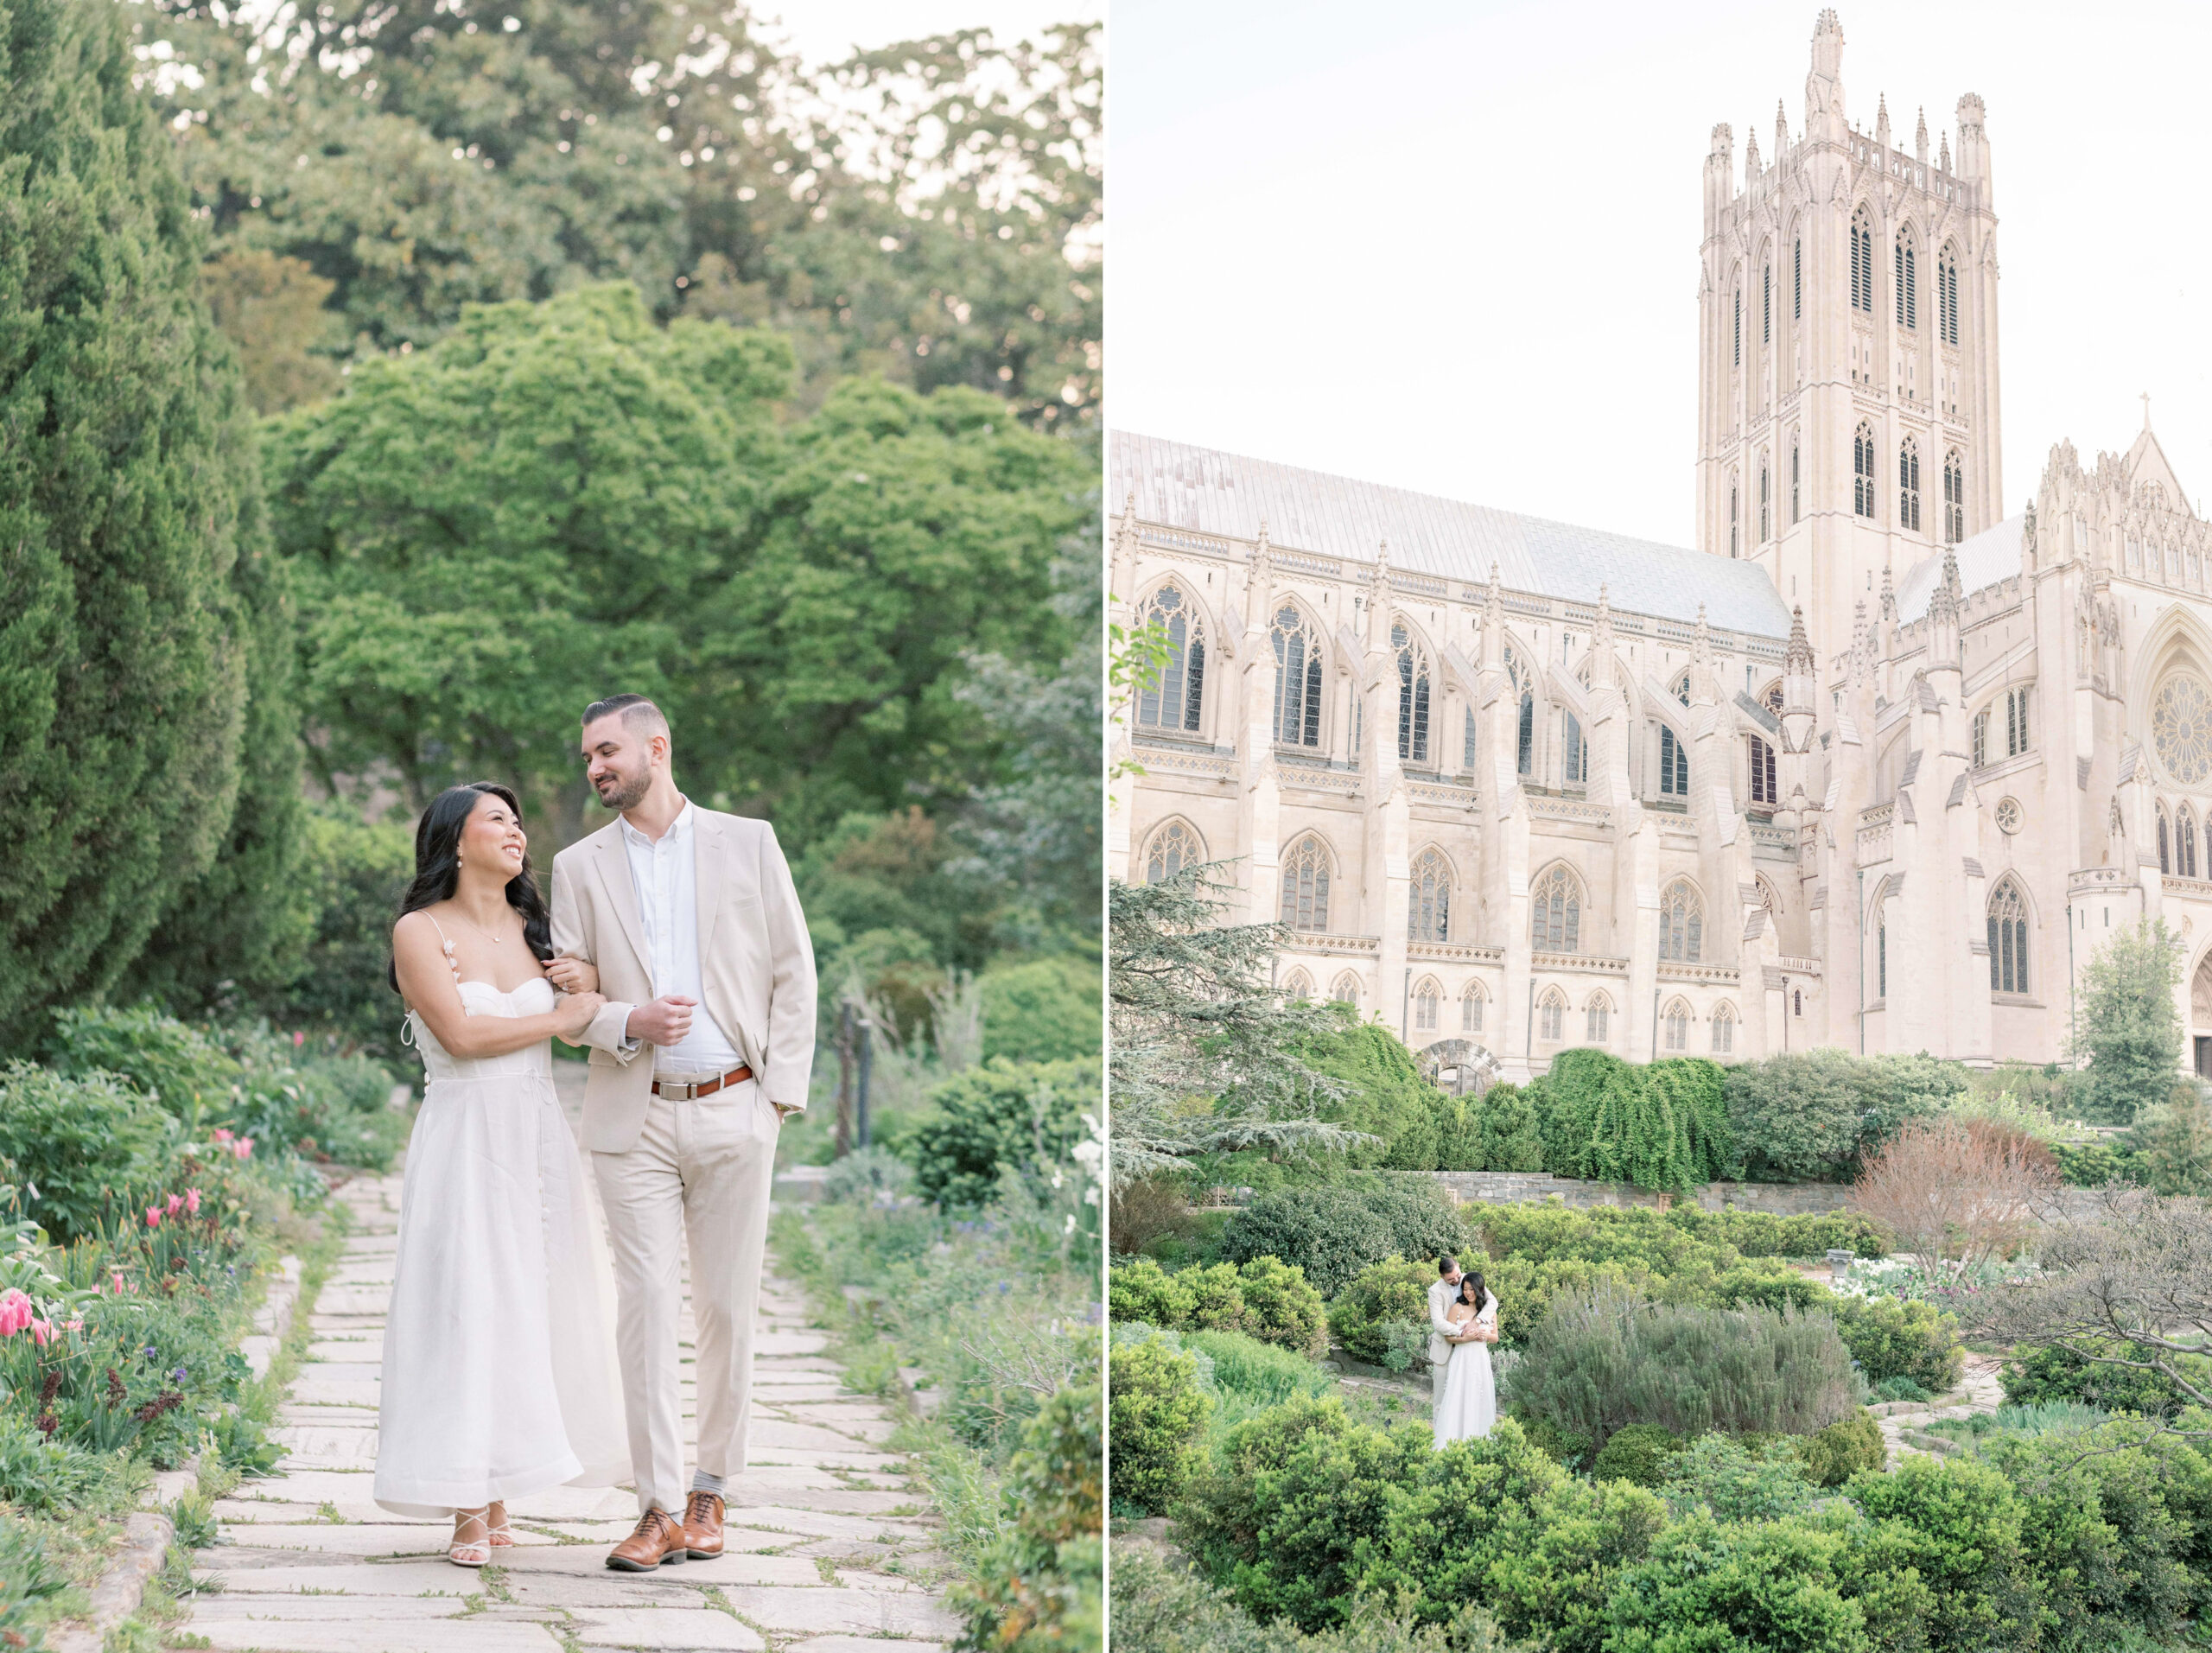 A stunning set of wedding anniversary portraits captured at the National Cathedral in Washington, DC.